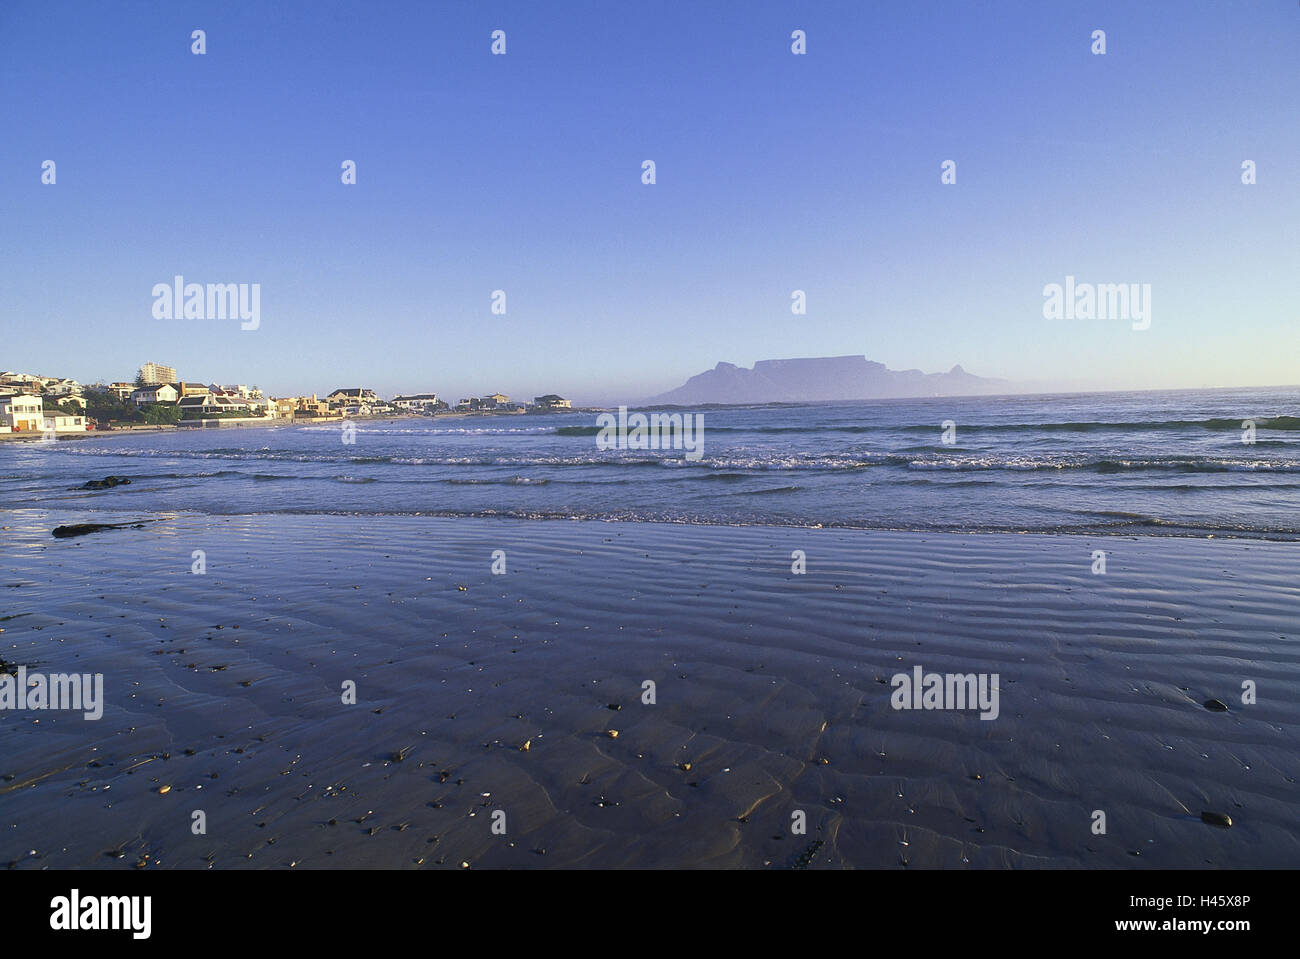 South, Africa, Capetown, beach, view, mesa, Sand, sea, the Atlantic, deserted, outside, houses, Stock Photo